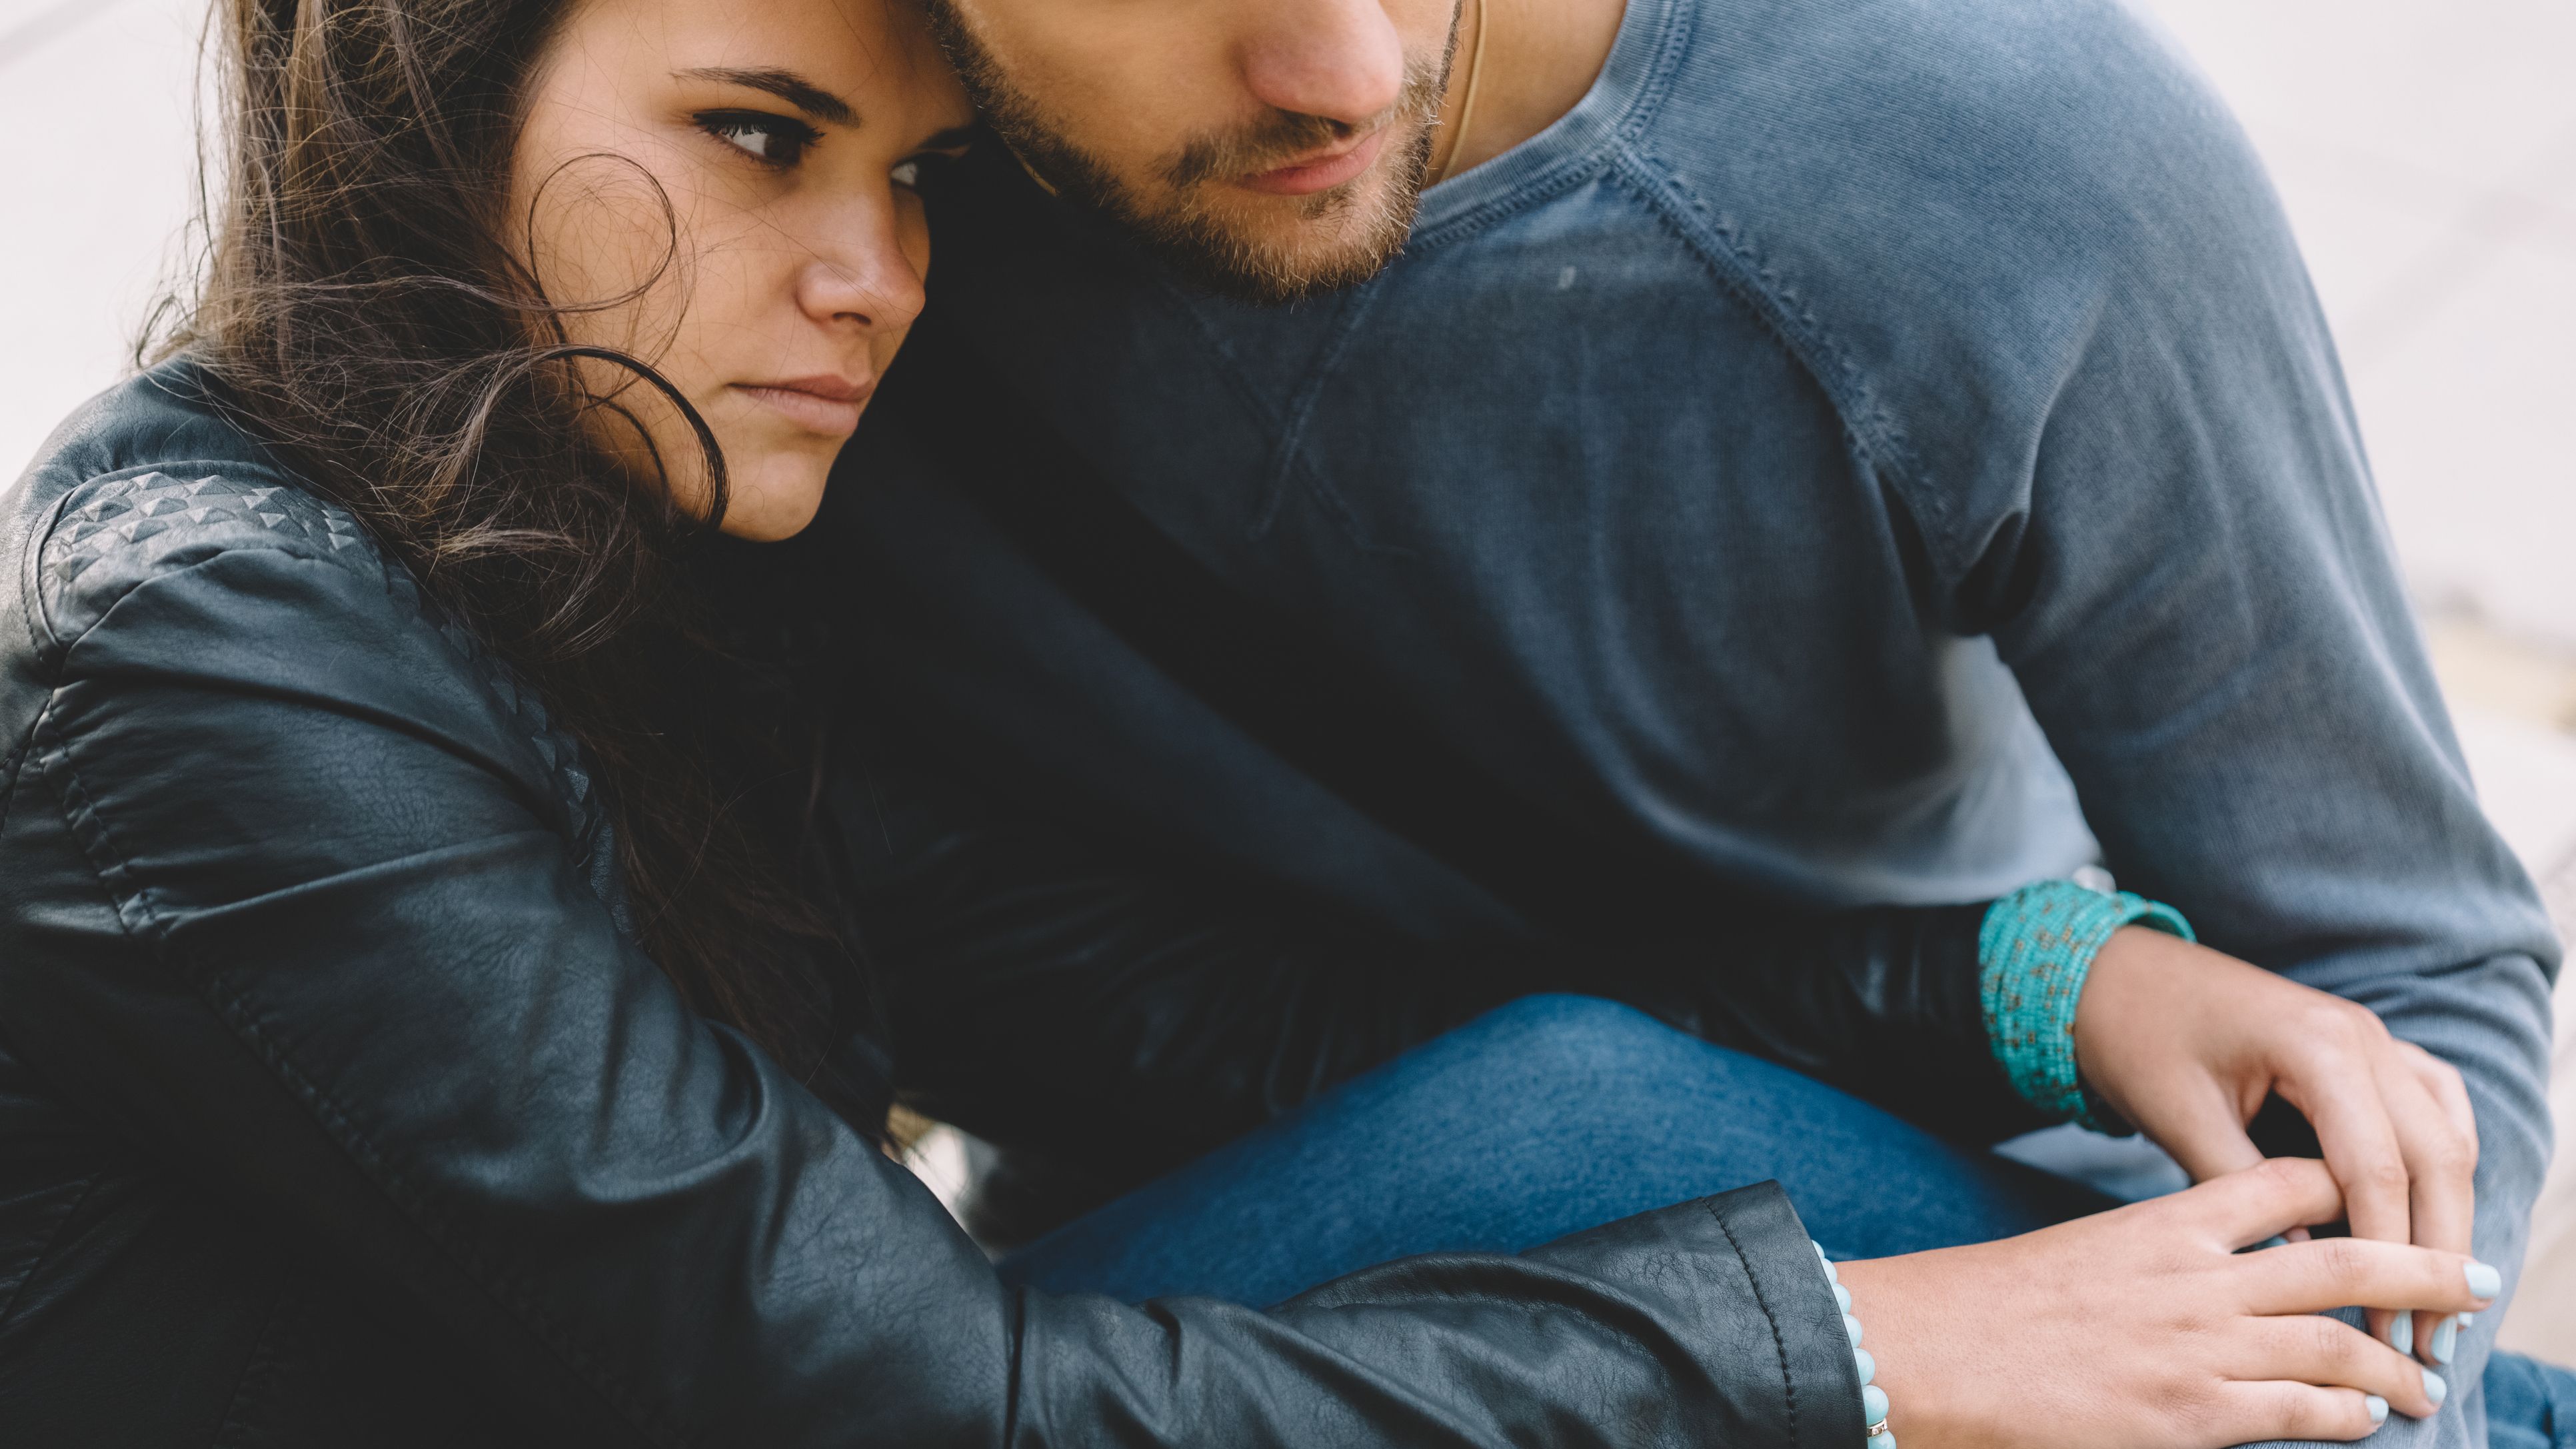 How to get over someone, according to a relationship expert